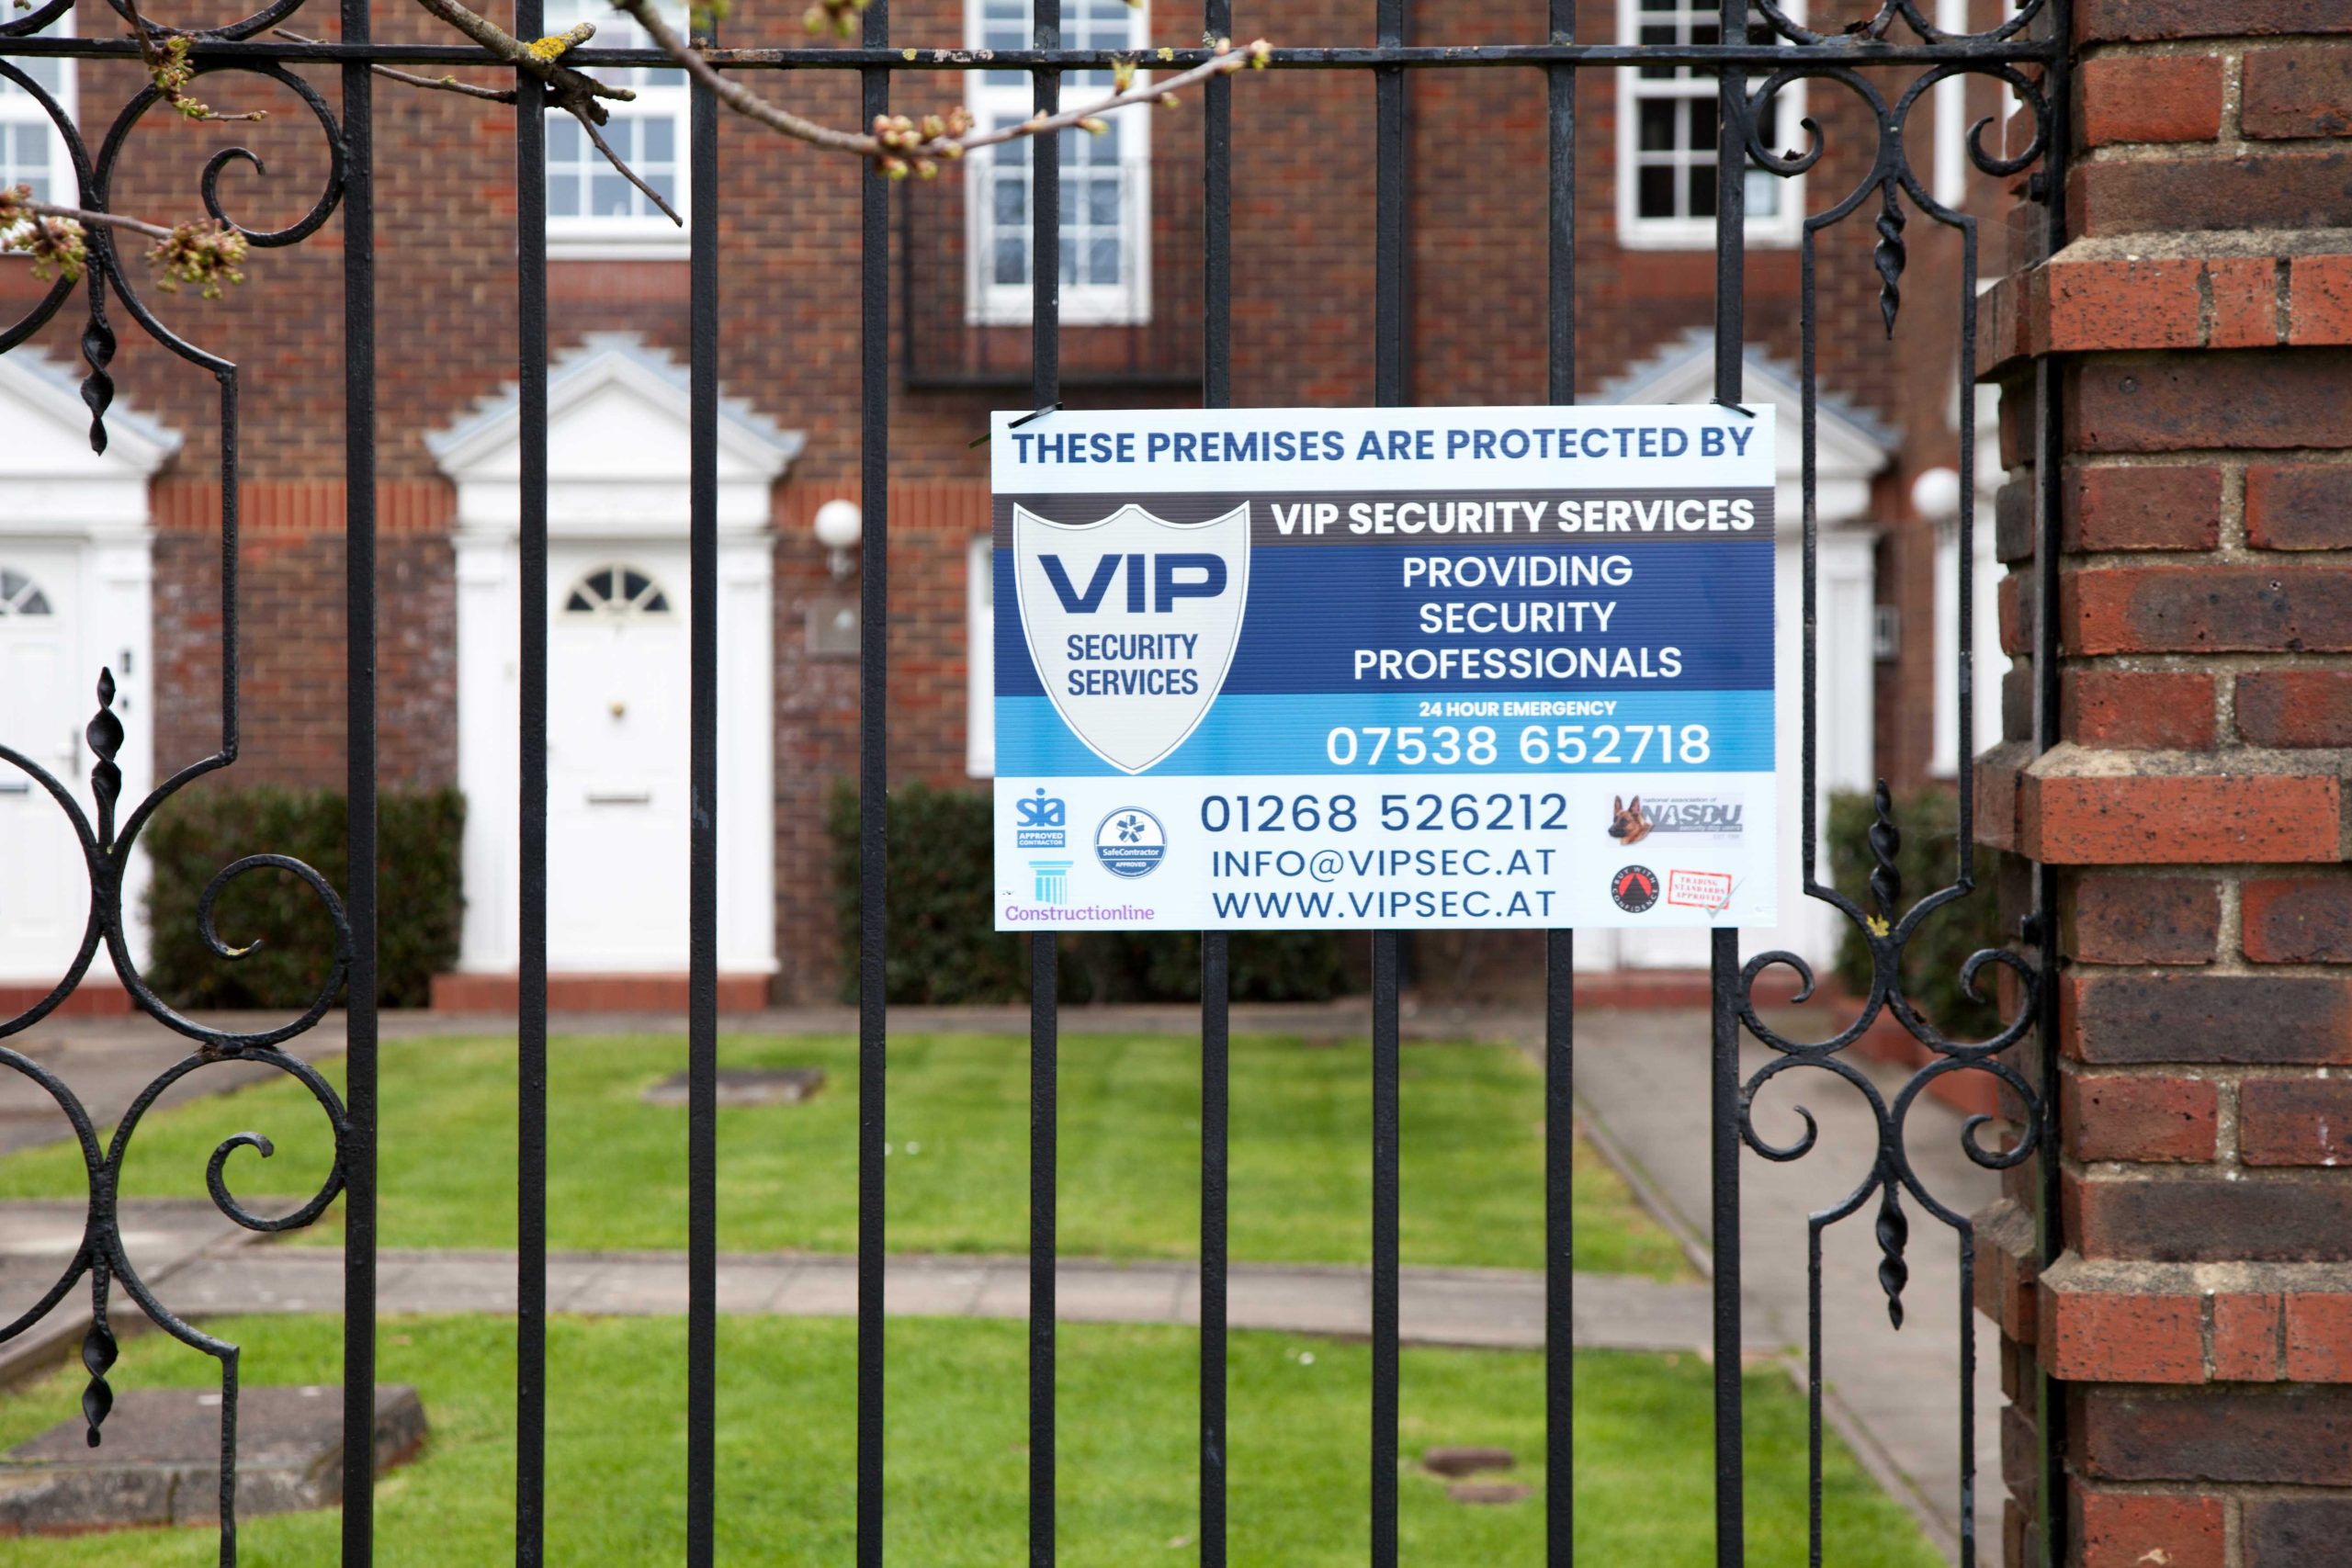 VIP Security Services sign, hanging on fence. 